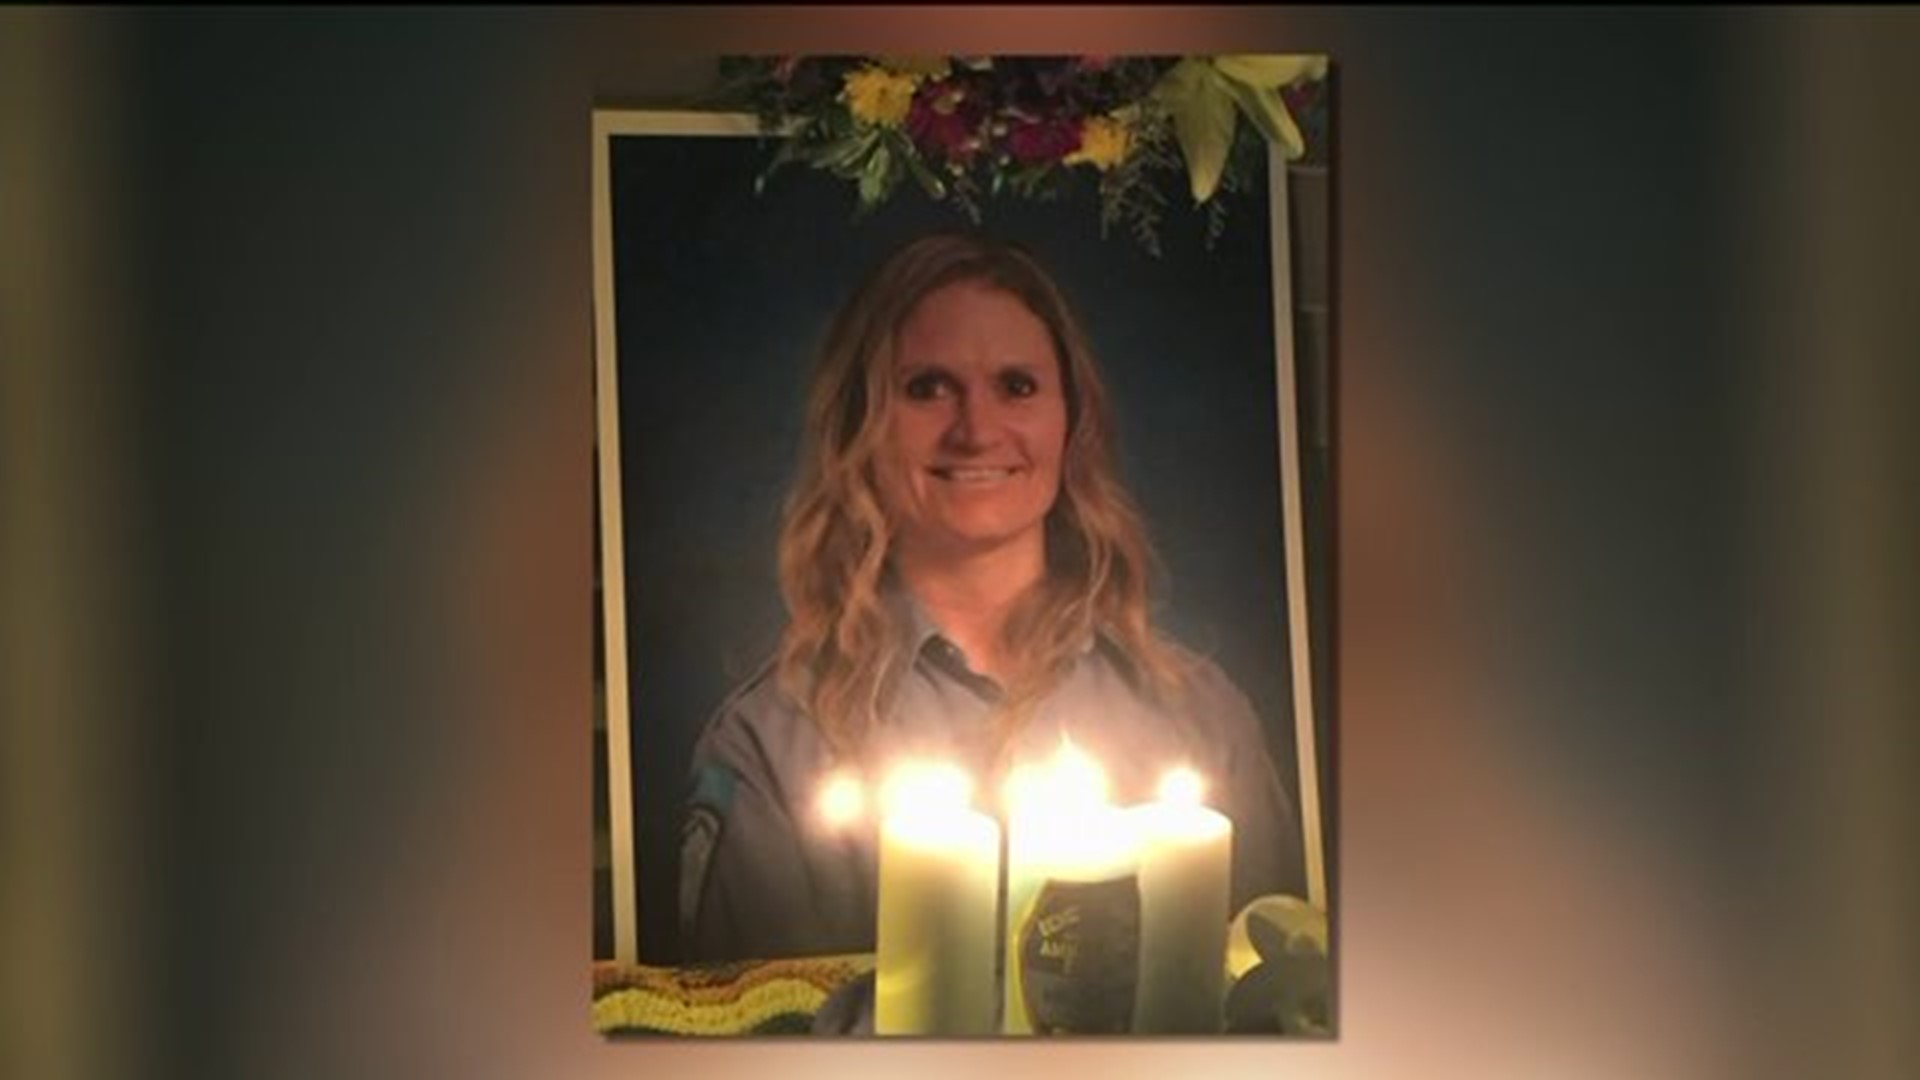 Shelton woman remembered by coworkers, friends, family after police say husband killed her